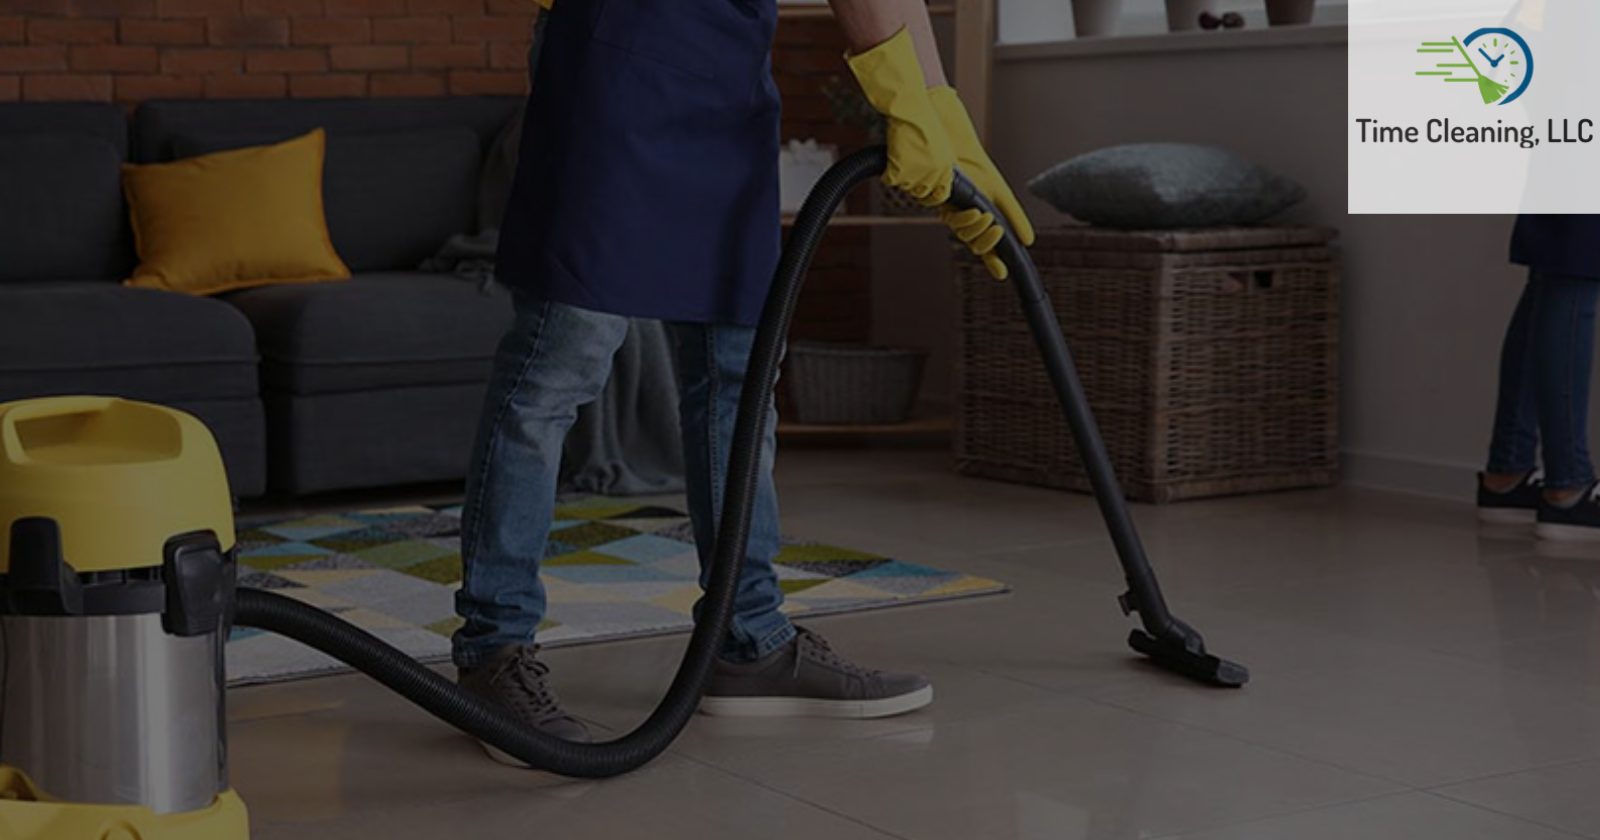 House and Office Cleaning Service Houston